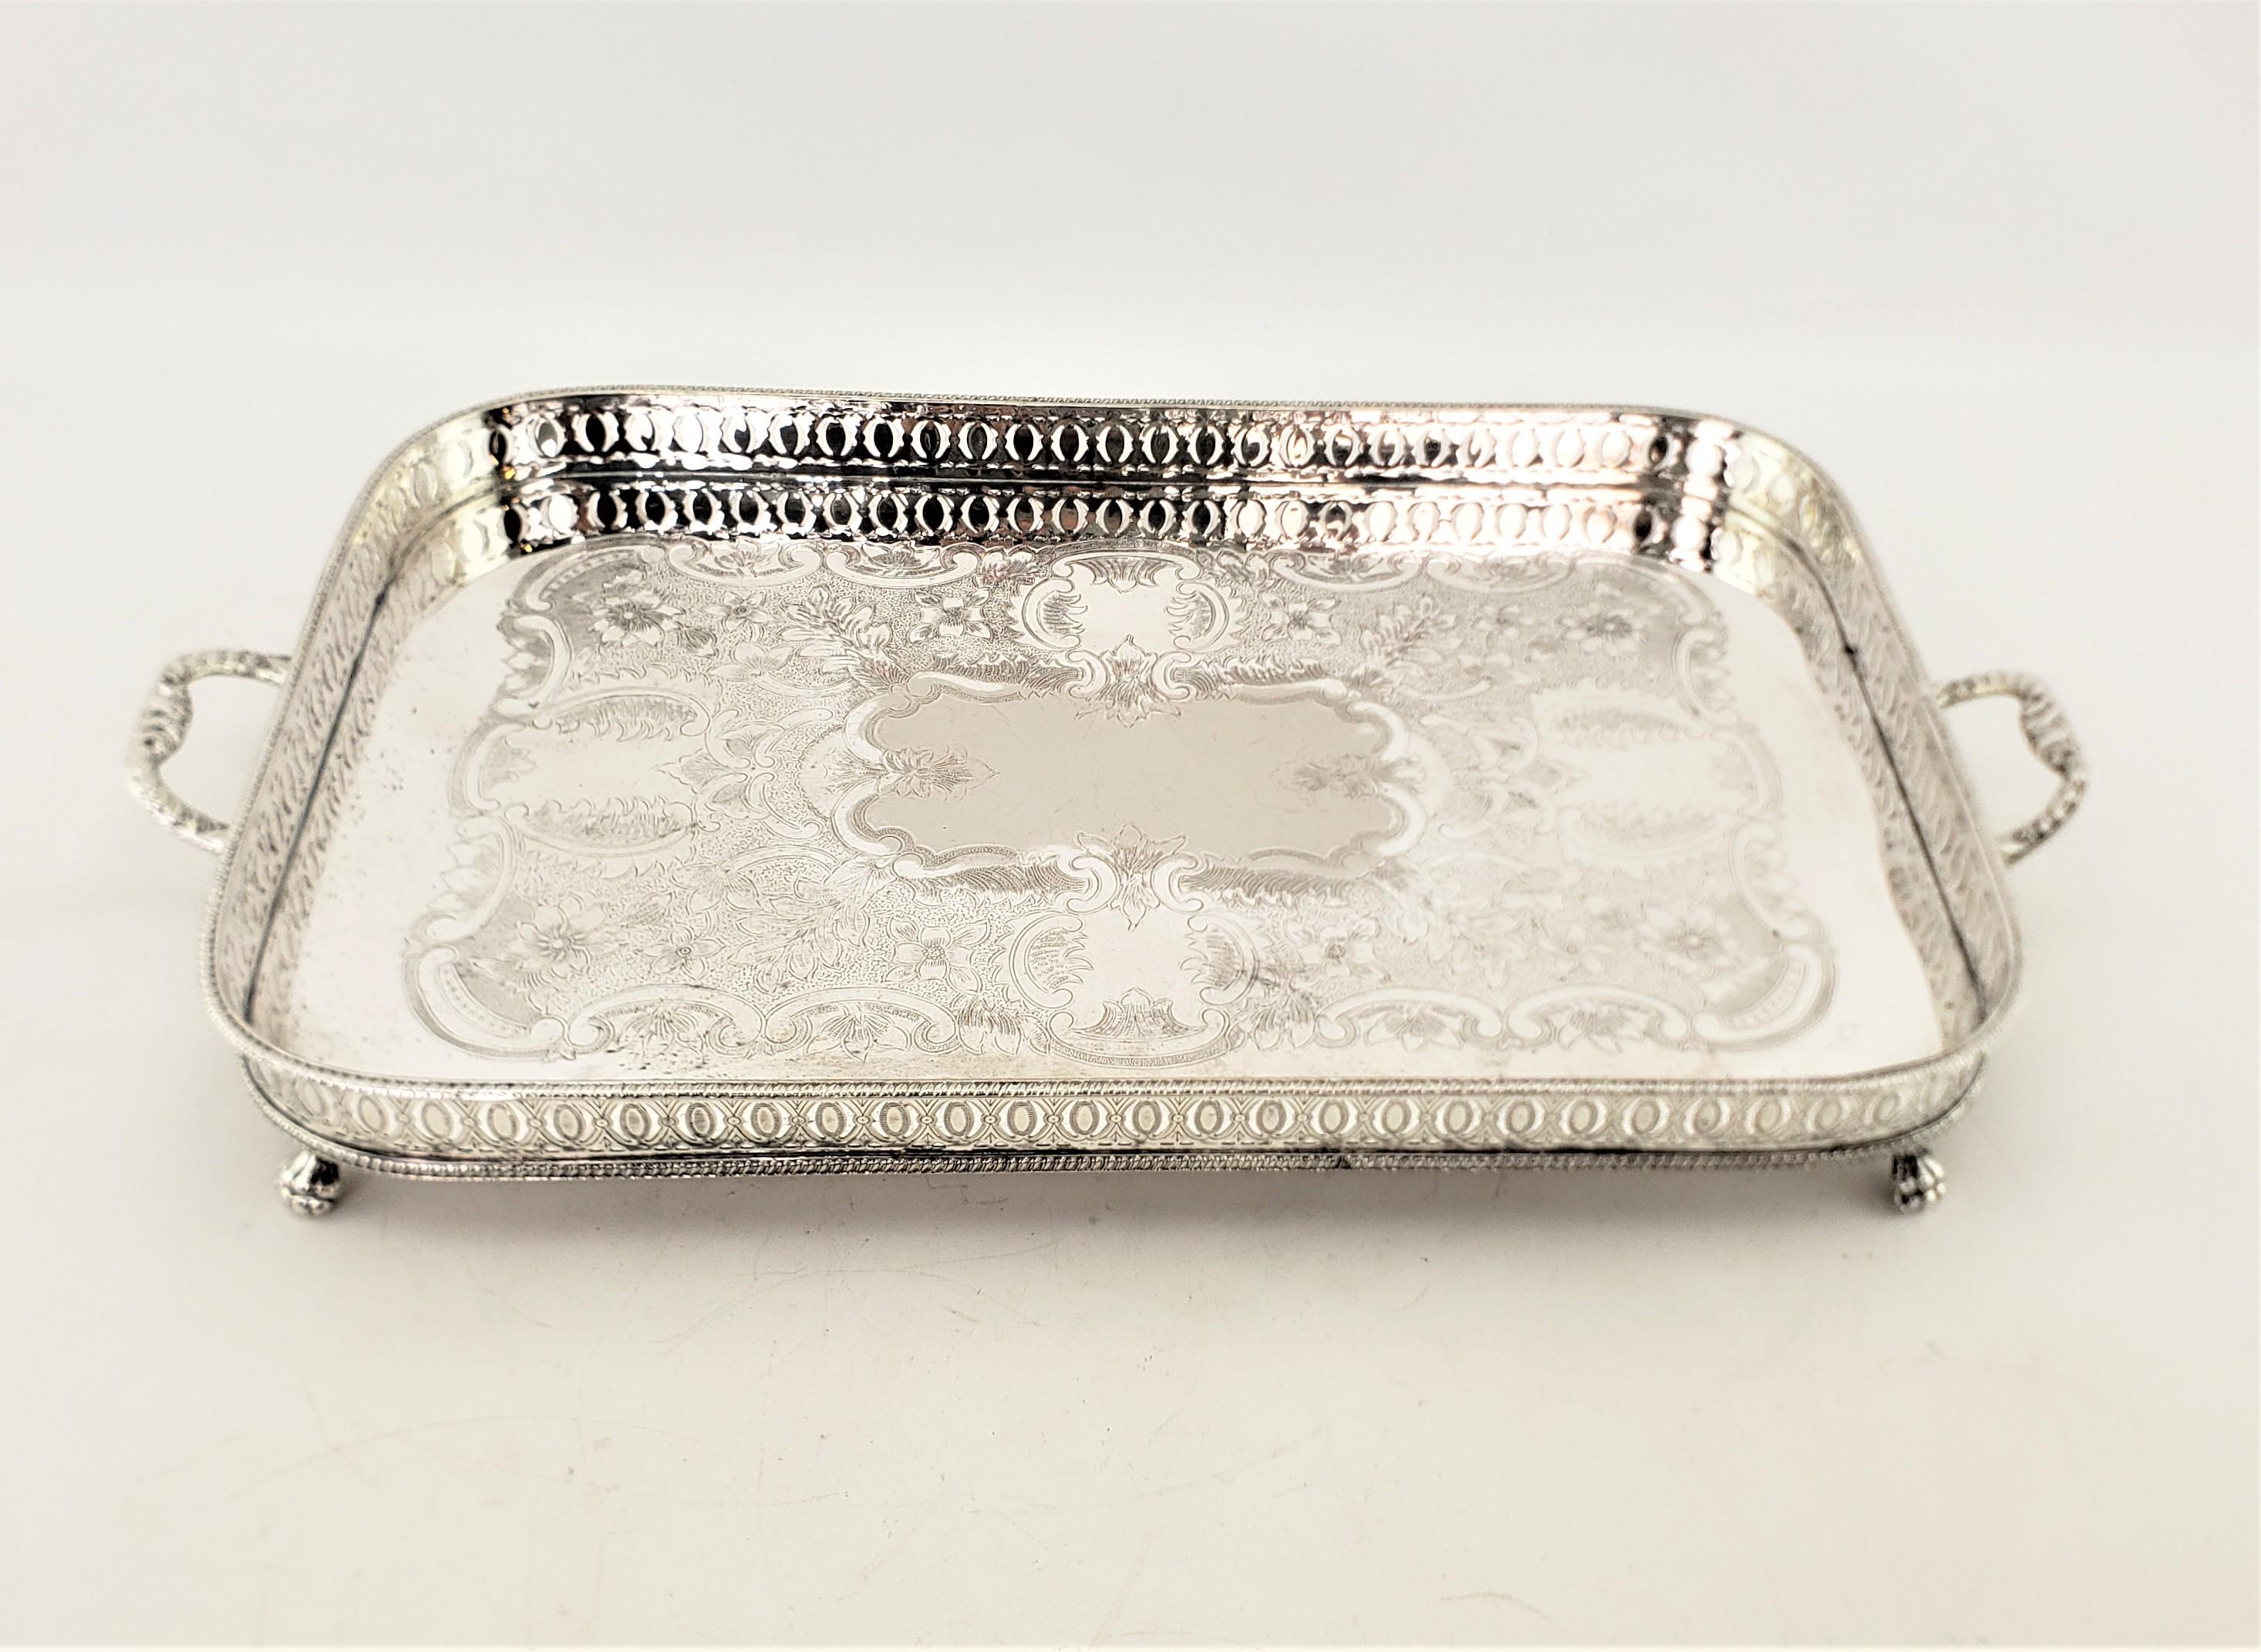 Antique English Silver Plated Footed Gallery Serving Tray with Floral Engraving 1